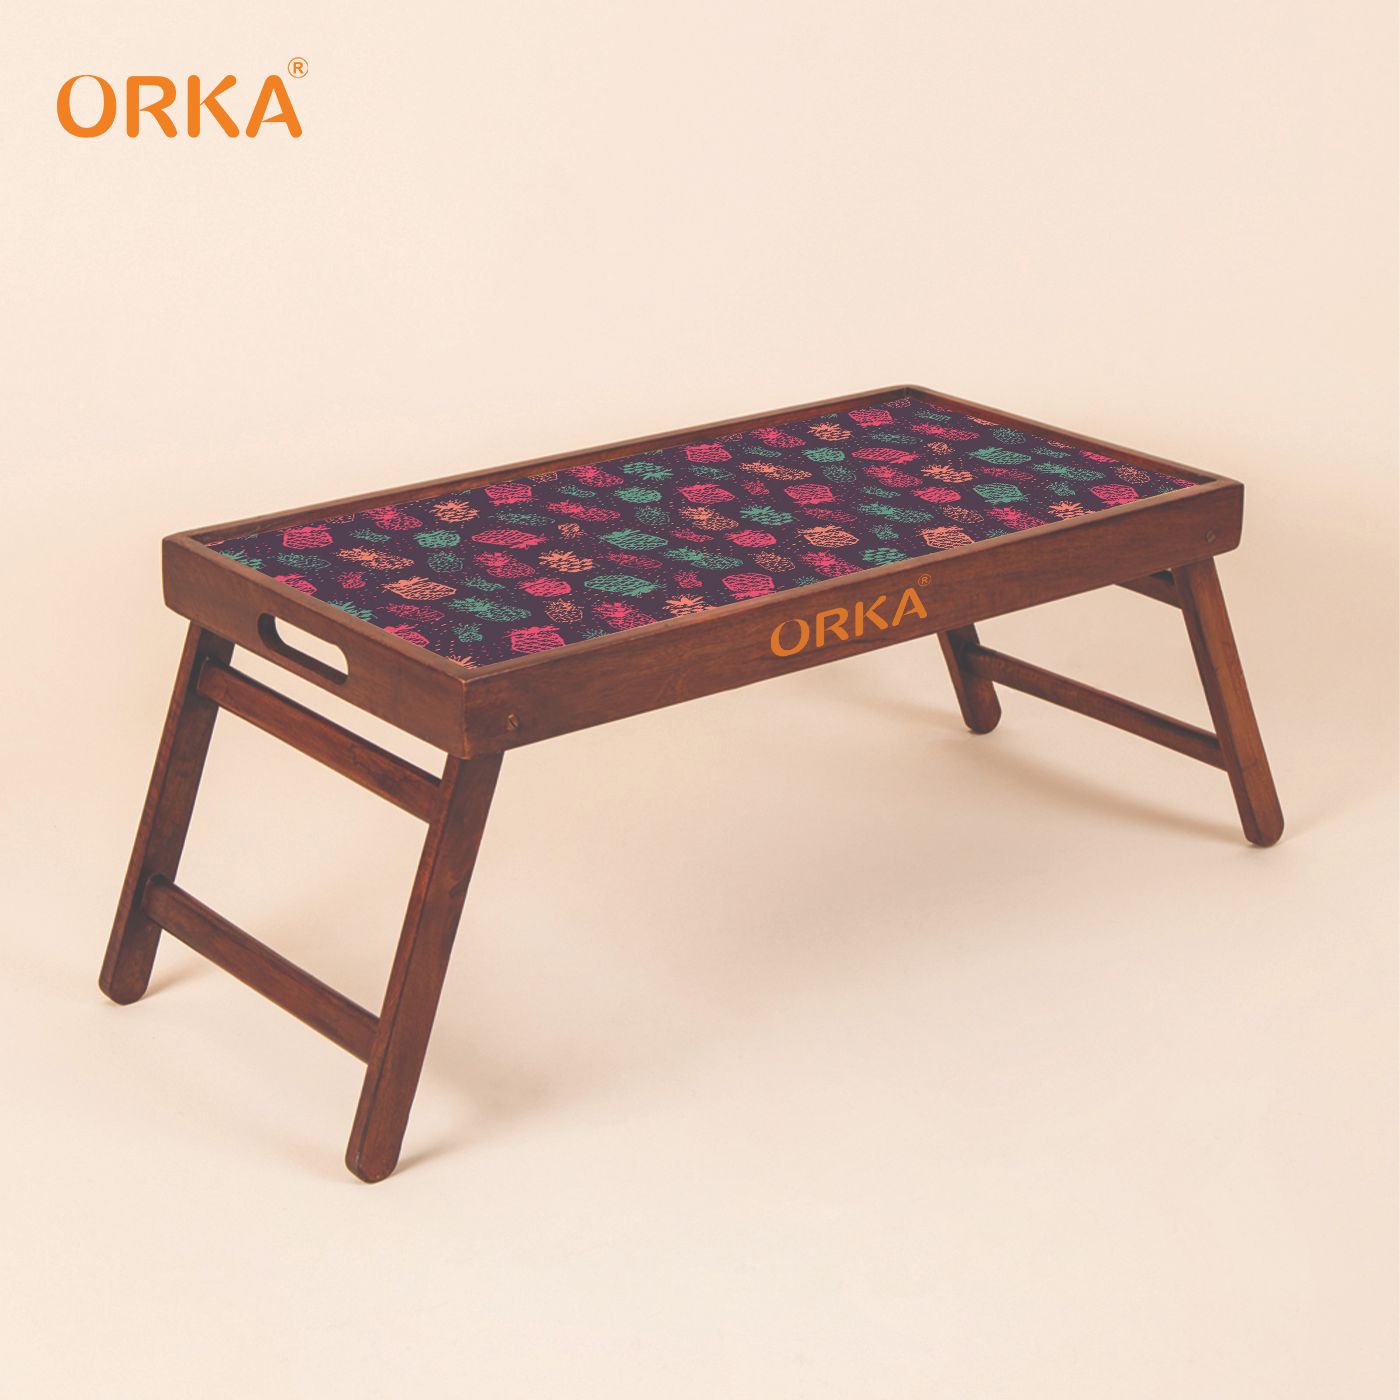 ORKA Dragonfly Foldable Pine Wood Breakfast Table (Multicolor)  